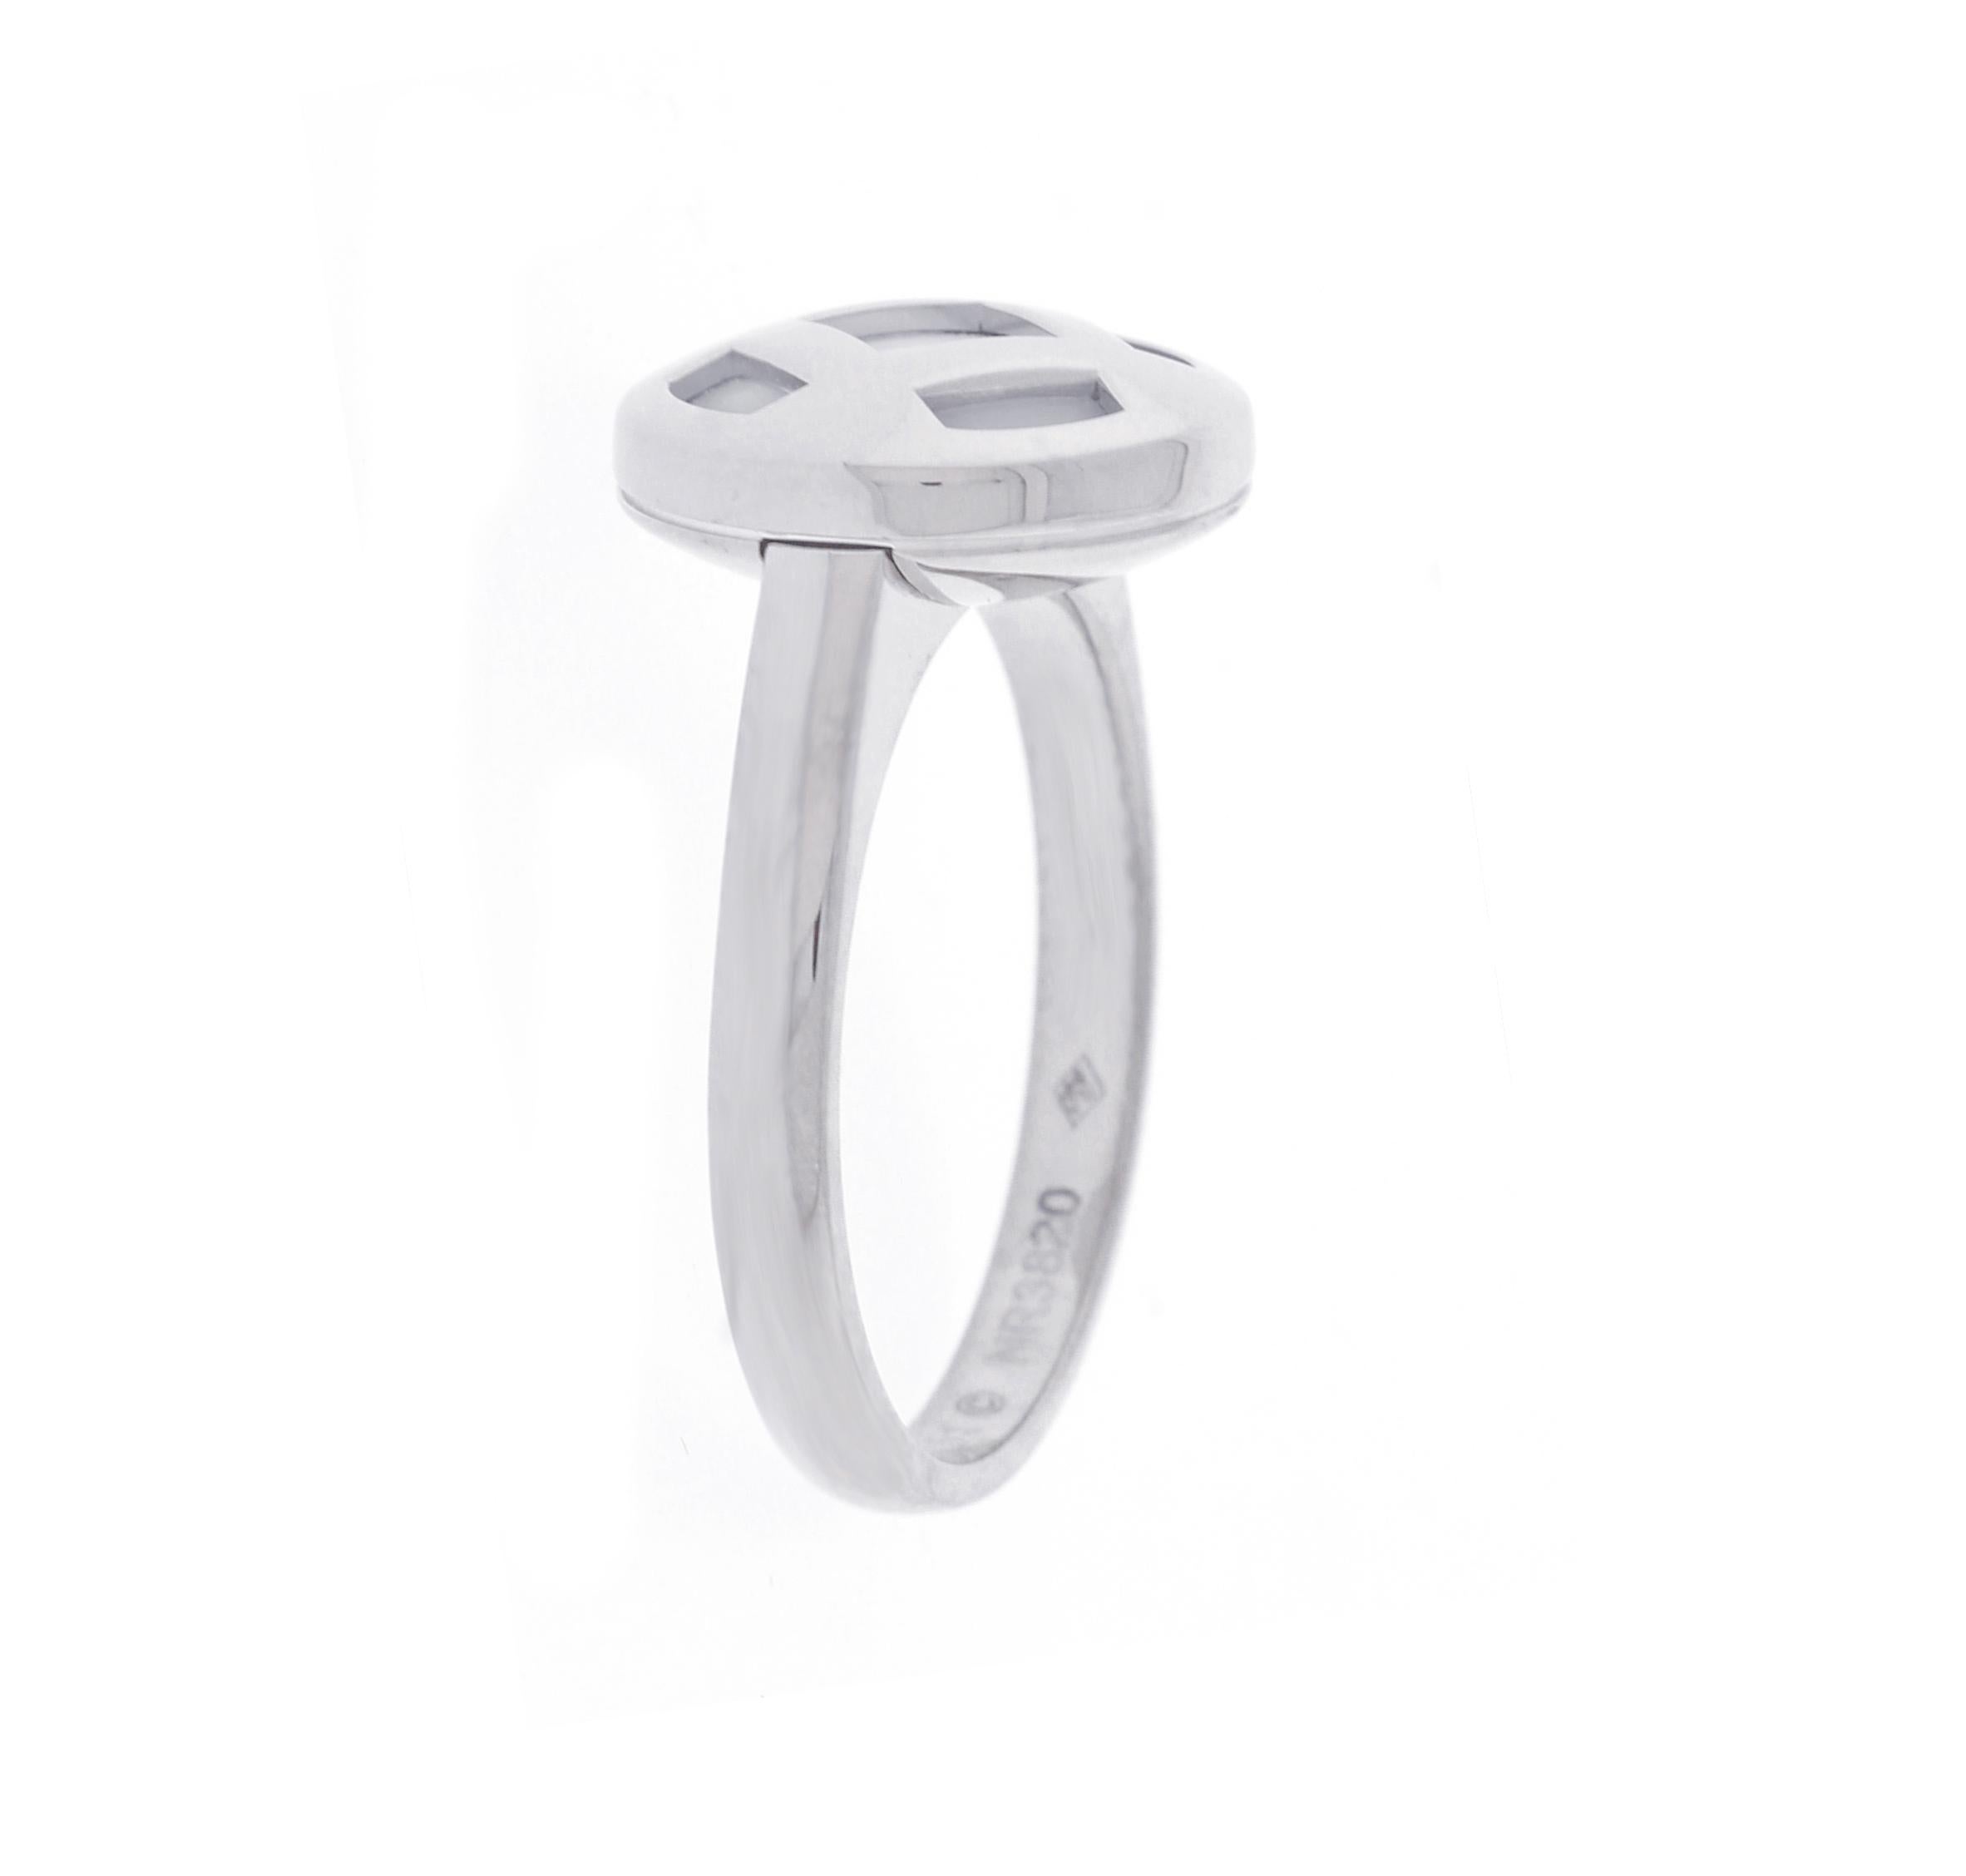 Form Cartier's Pasha collection white gold mother of pearl pasha ring.
♦ Designer: Cartier
♦ Metal: 18 karat
♦ Circa 1990s
♦ top section 11.7mm
♦ 6.9 grams
♦ Packaging: Cartier pouch
♦ Condition: Excellent , pre-owned
♦ Price: Based on the market,